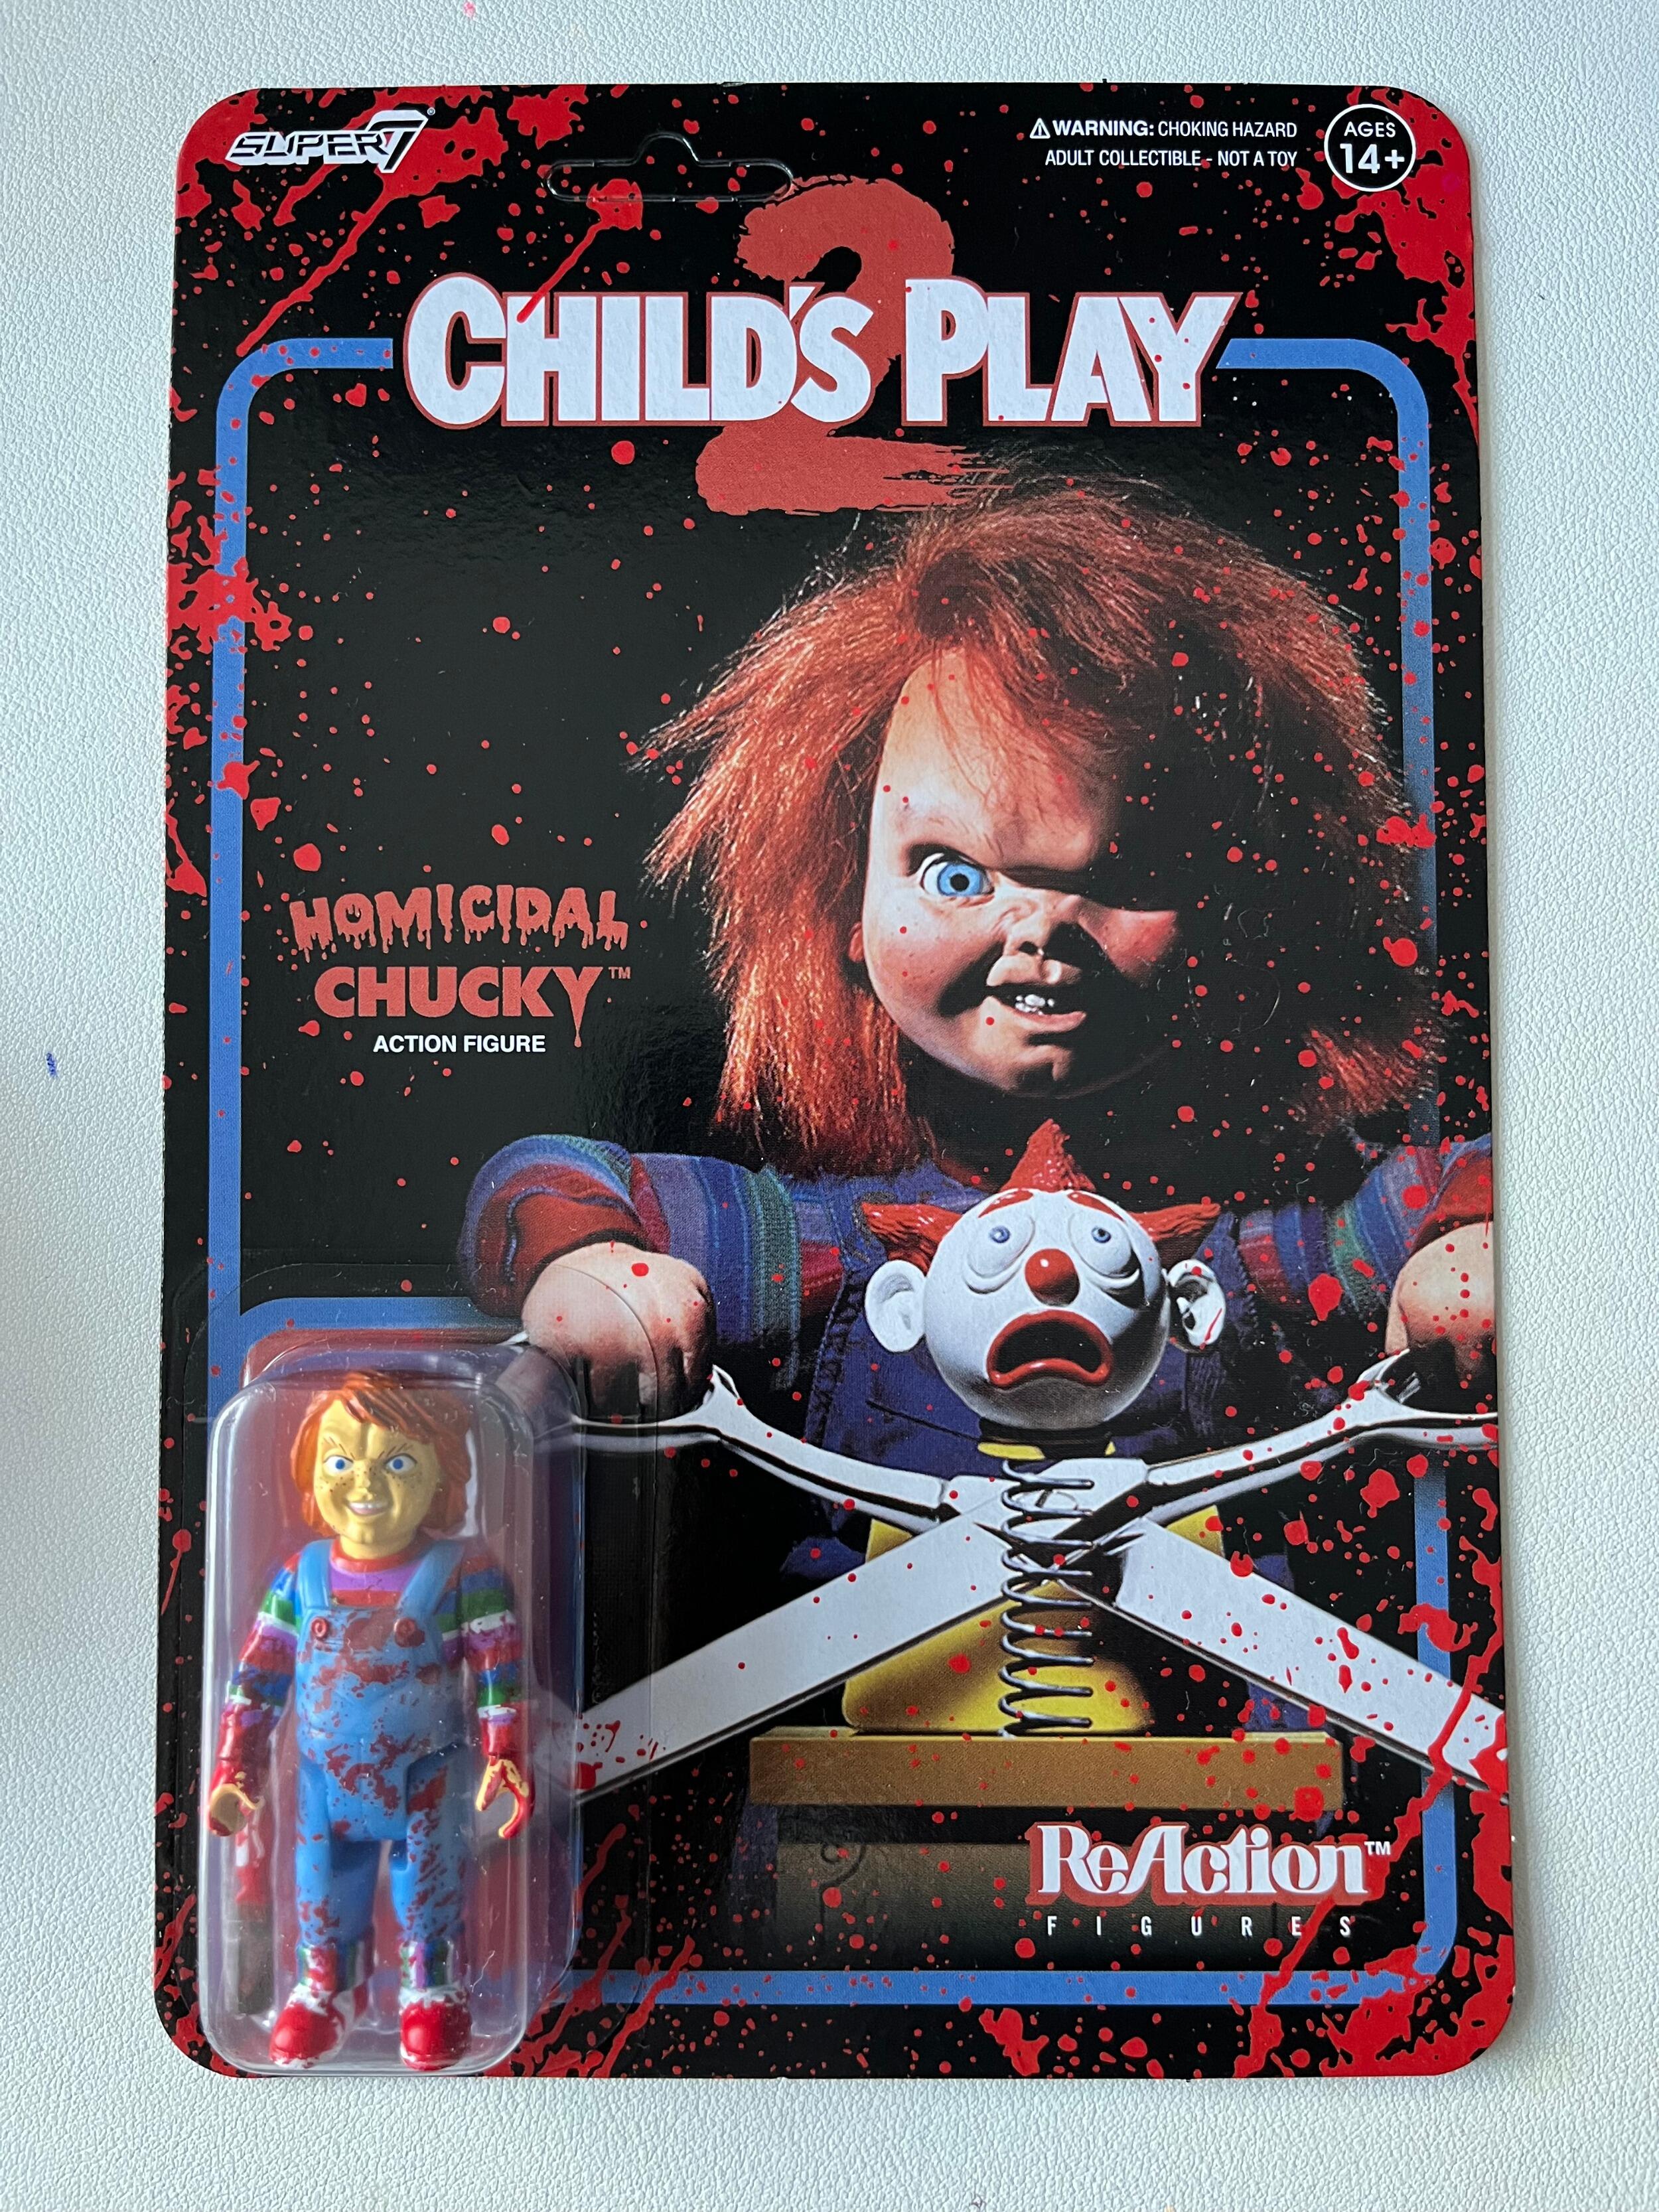 Chucky is done trying to be anyone’s best friend, because all he wants now is revenge, no matter how much blood has to be spilled! This 2.75” articulated Child’s Play 2 ReAction figure of Evil Chucky featuring generous blood-splatter